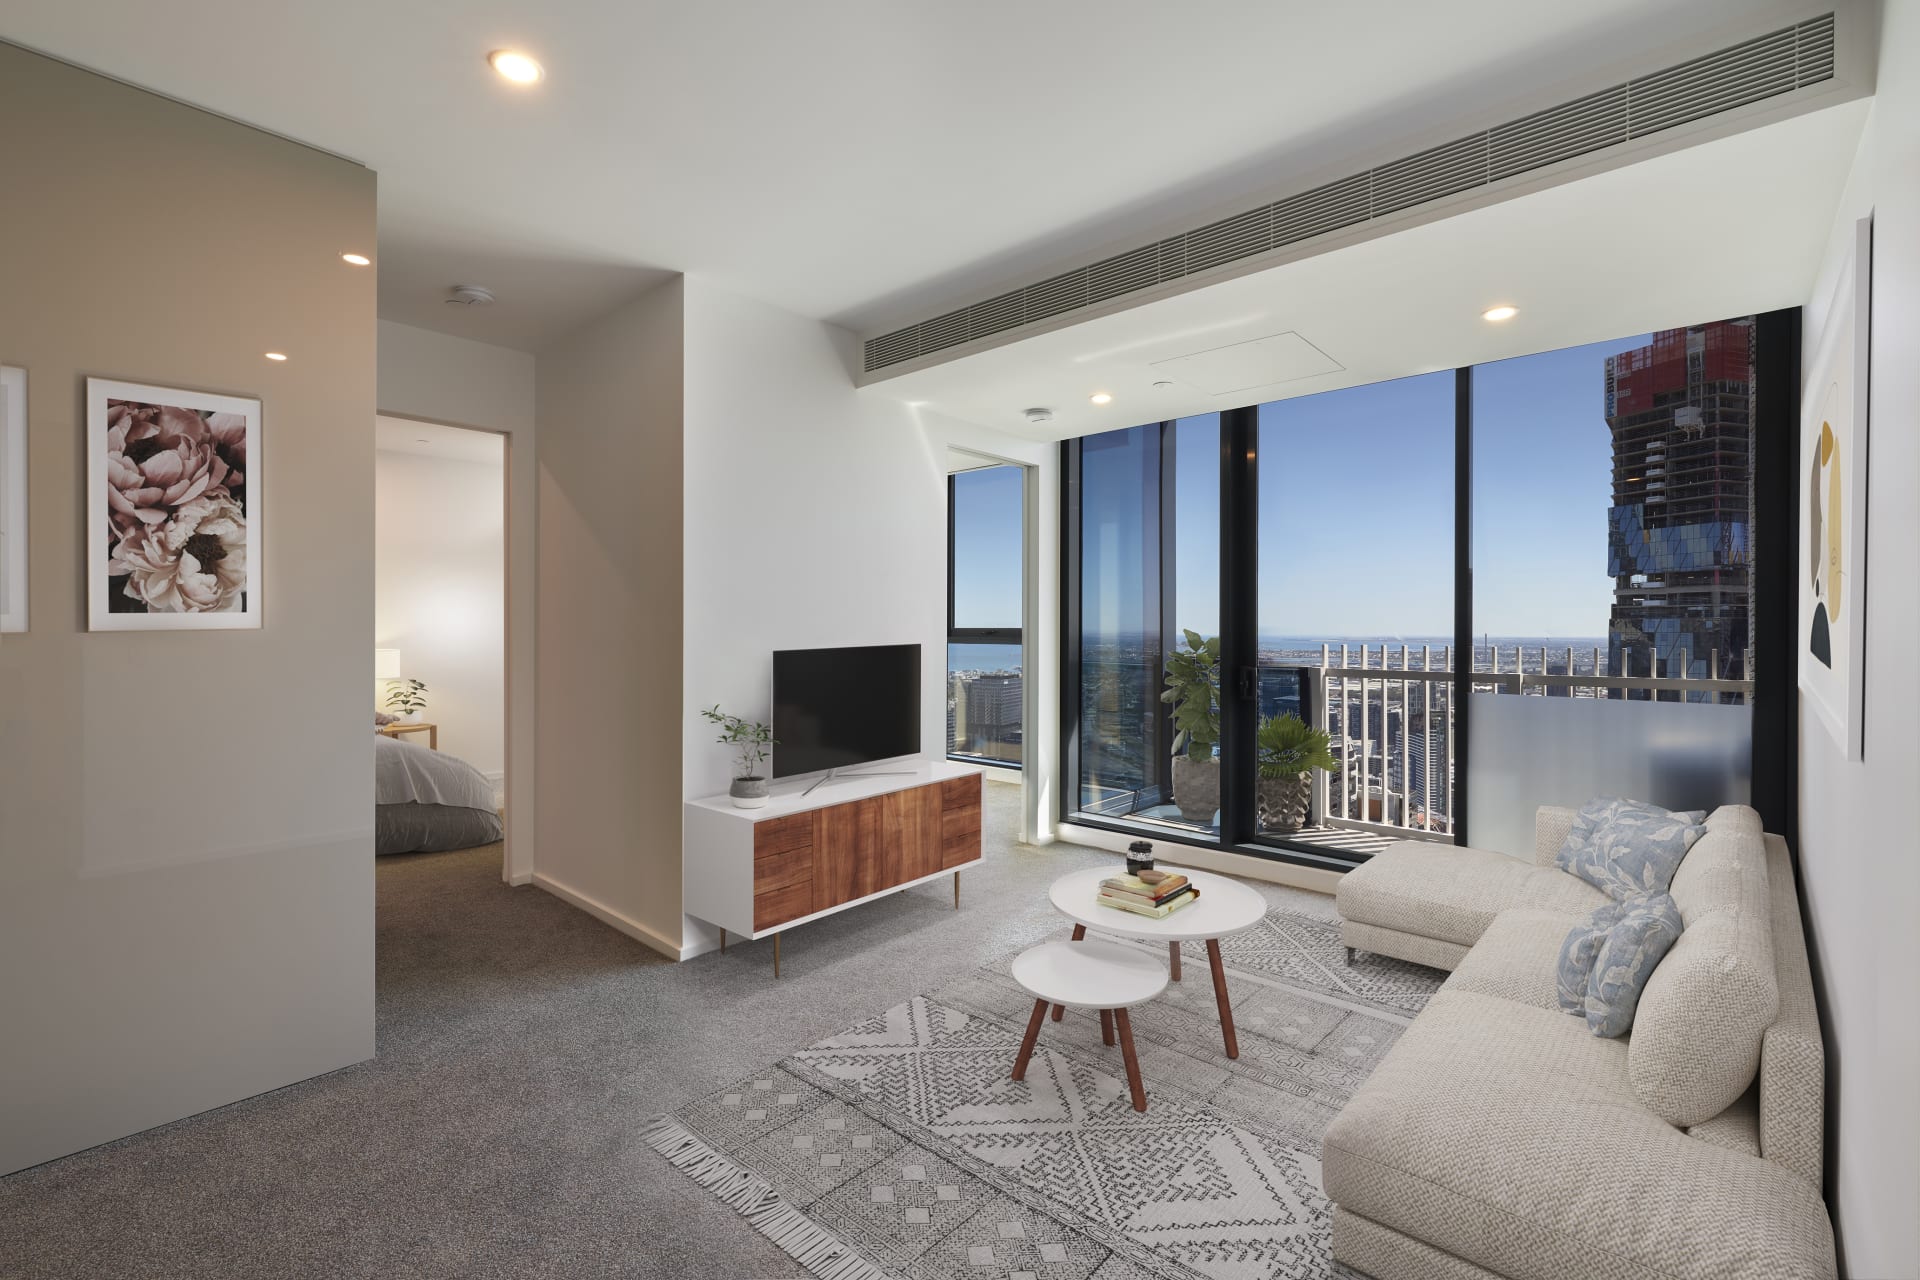 Check out 11 apartments in Melbourne with incredible city views